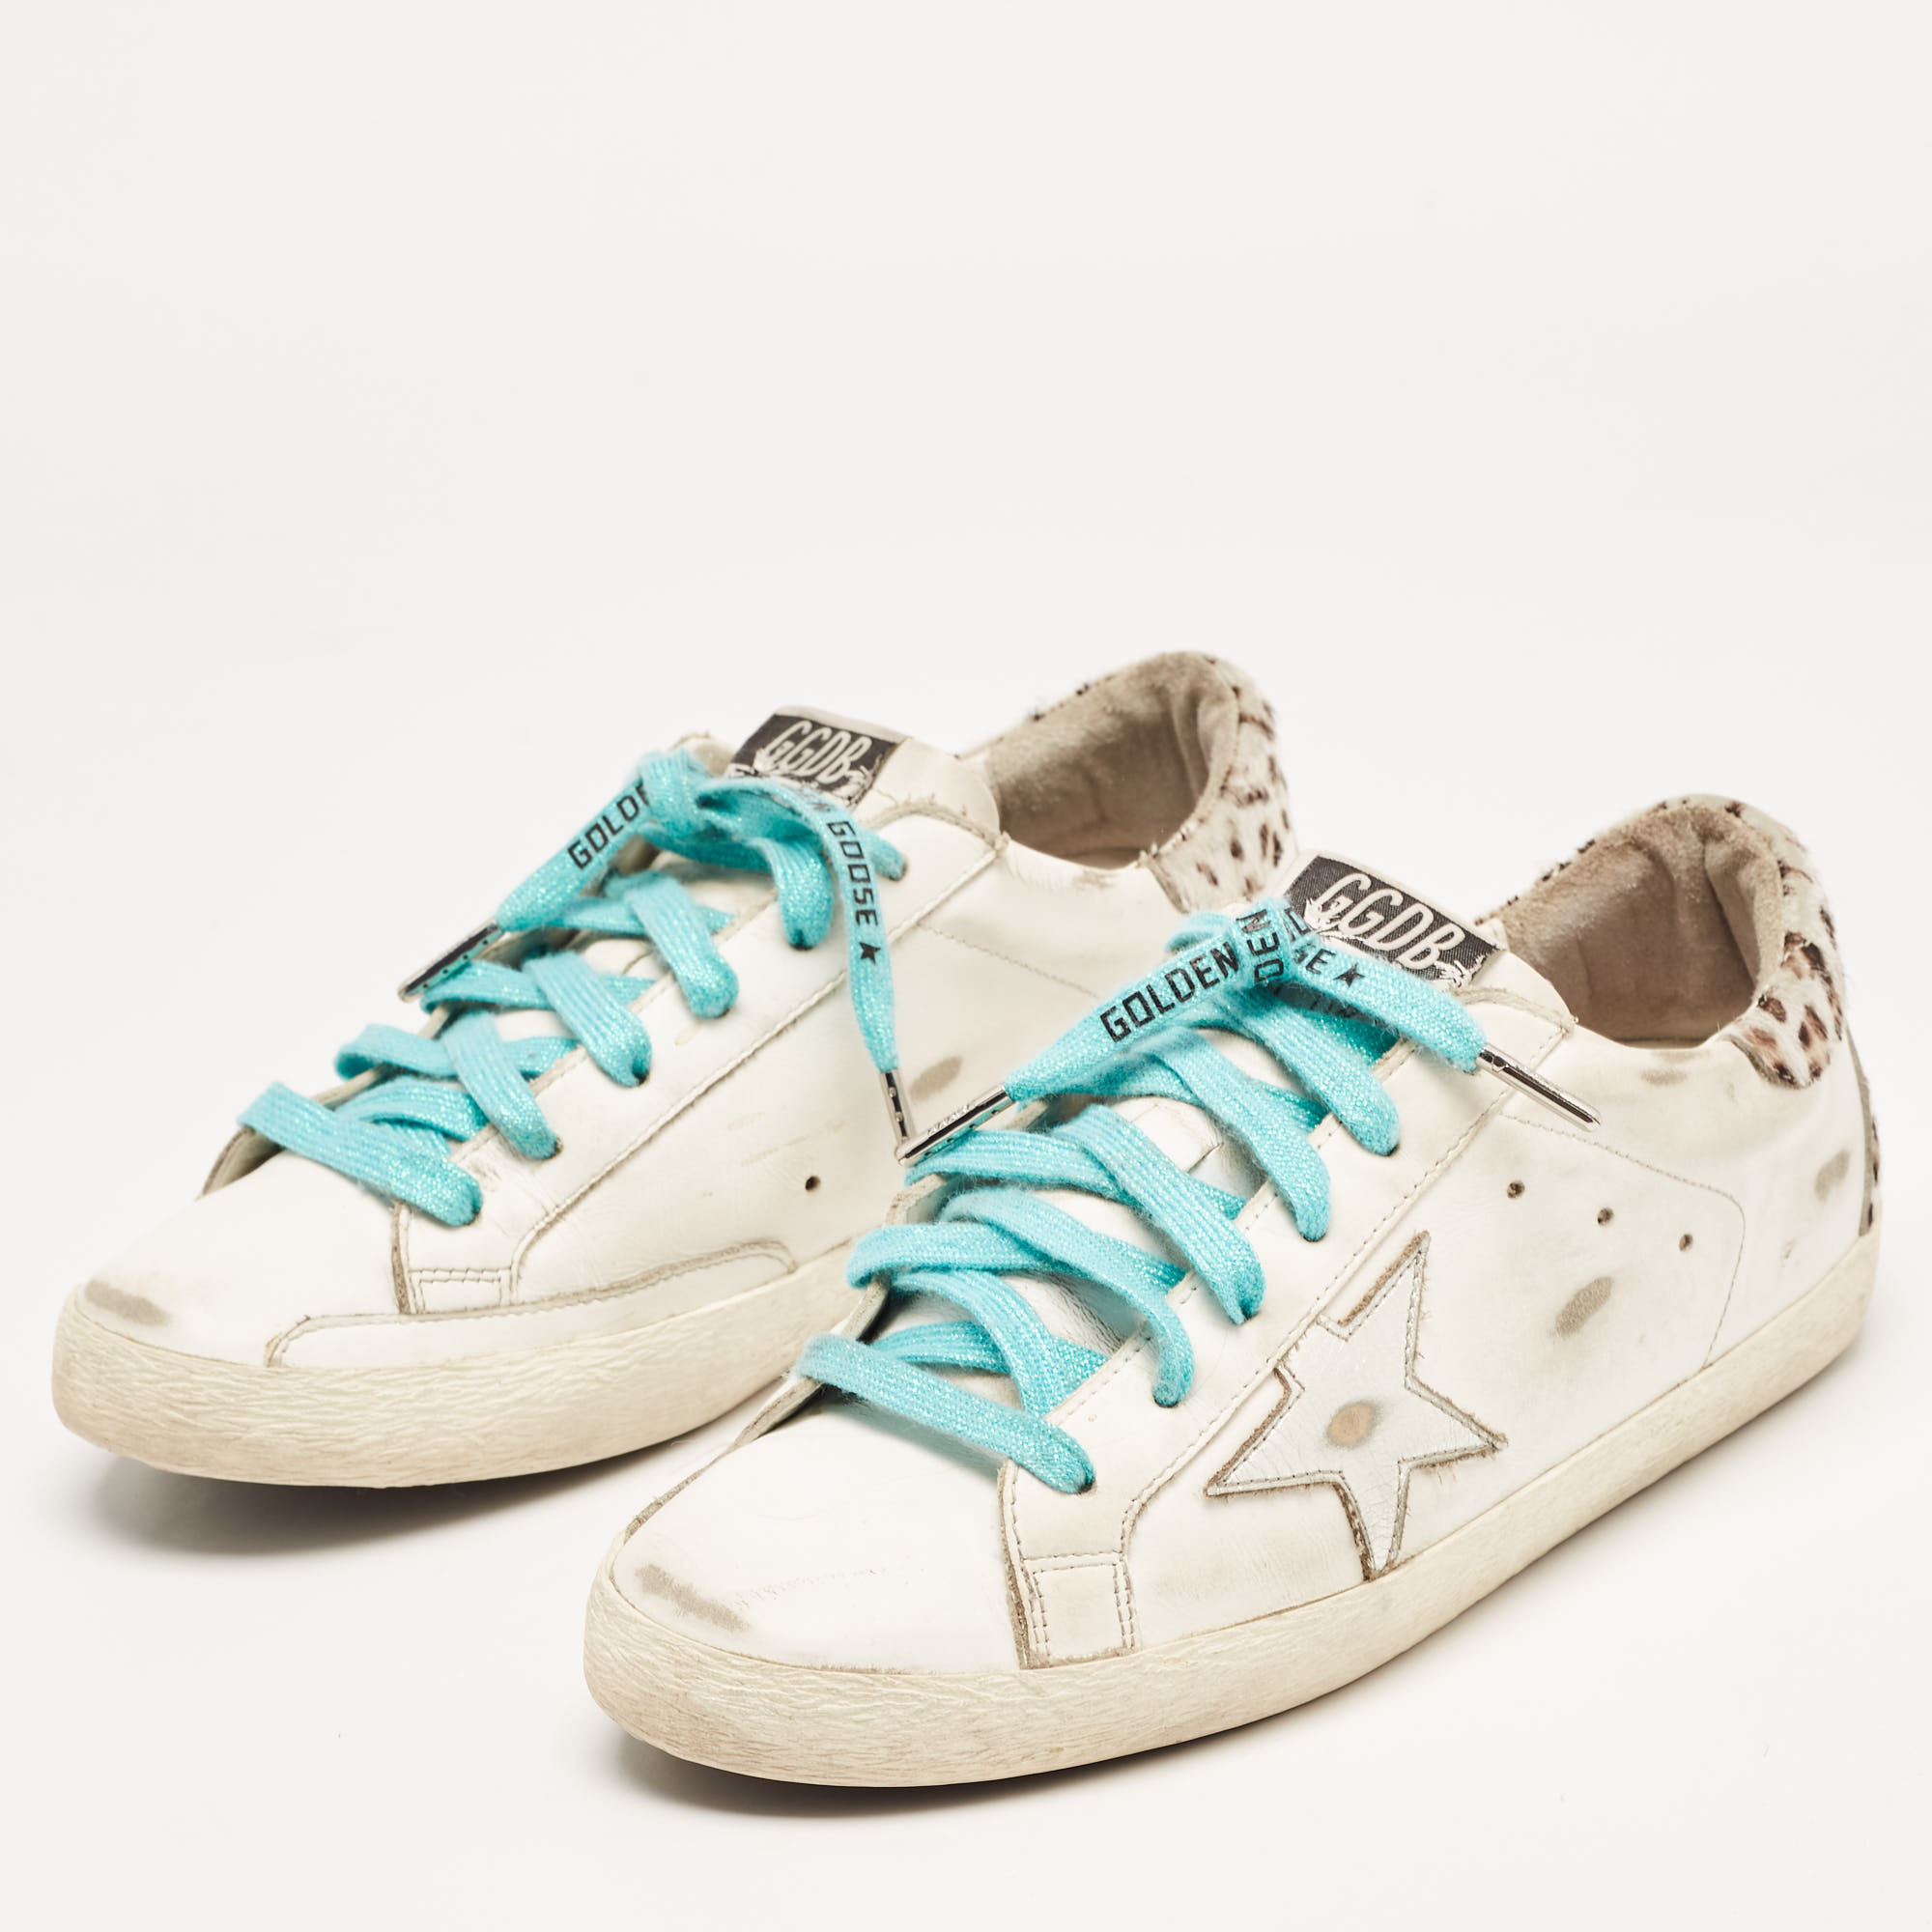 

Golden Goose White Leather and Calf Hair Superstar Sneakers Size